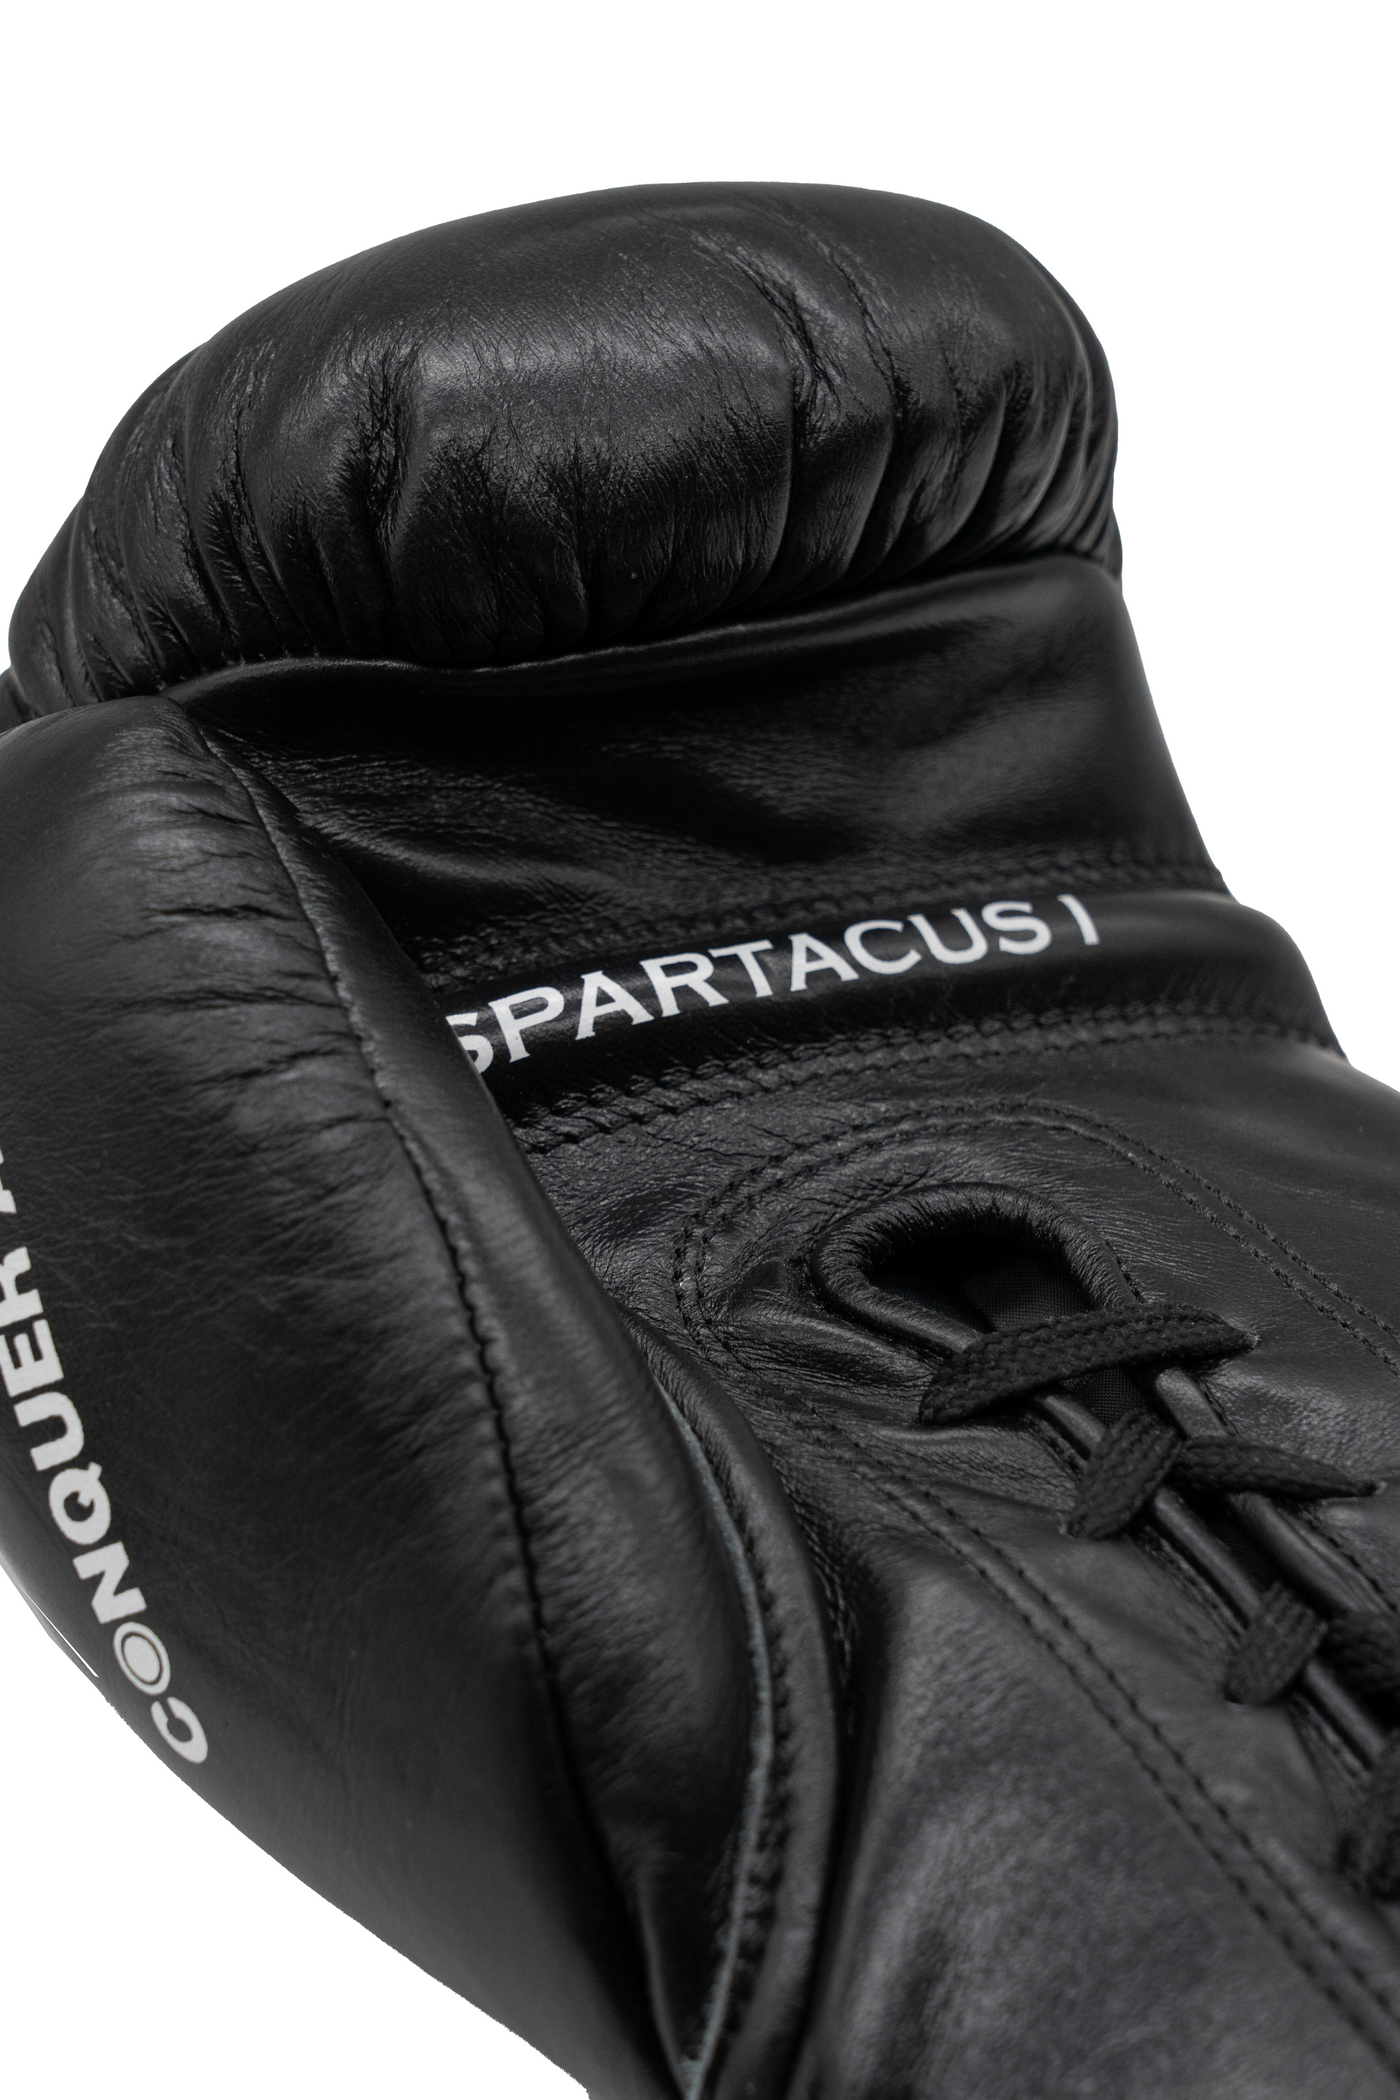 SPARTACUS I Sparring Gloves (Laces)